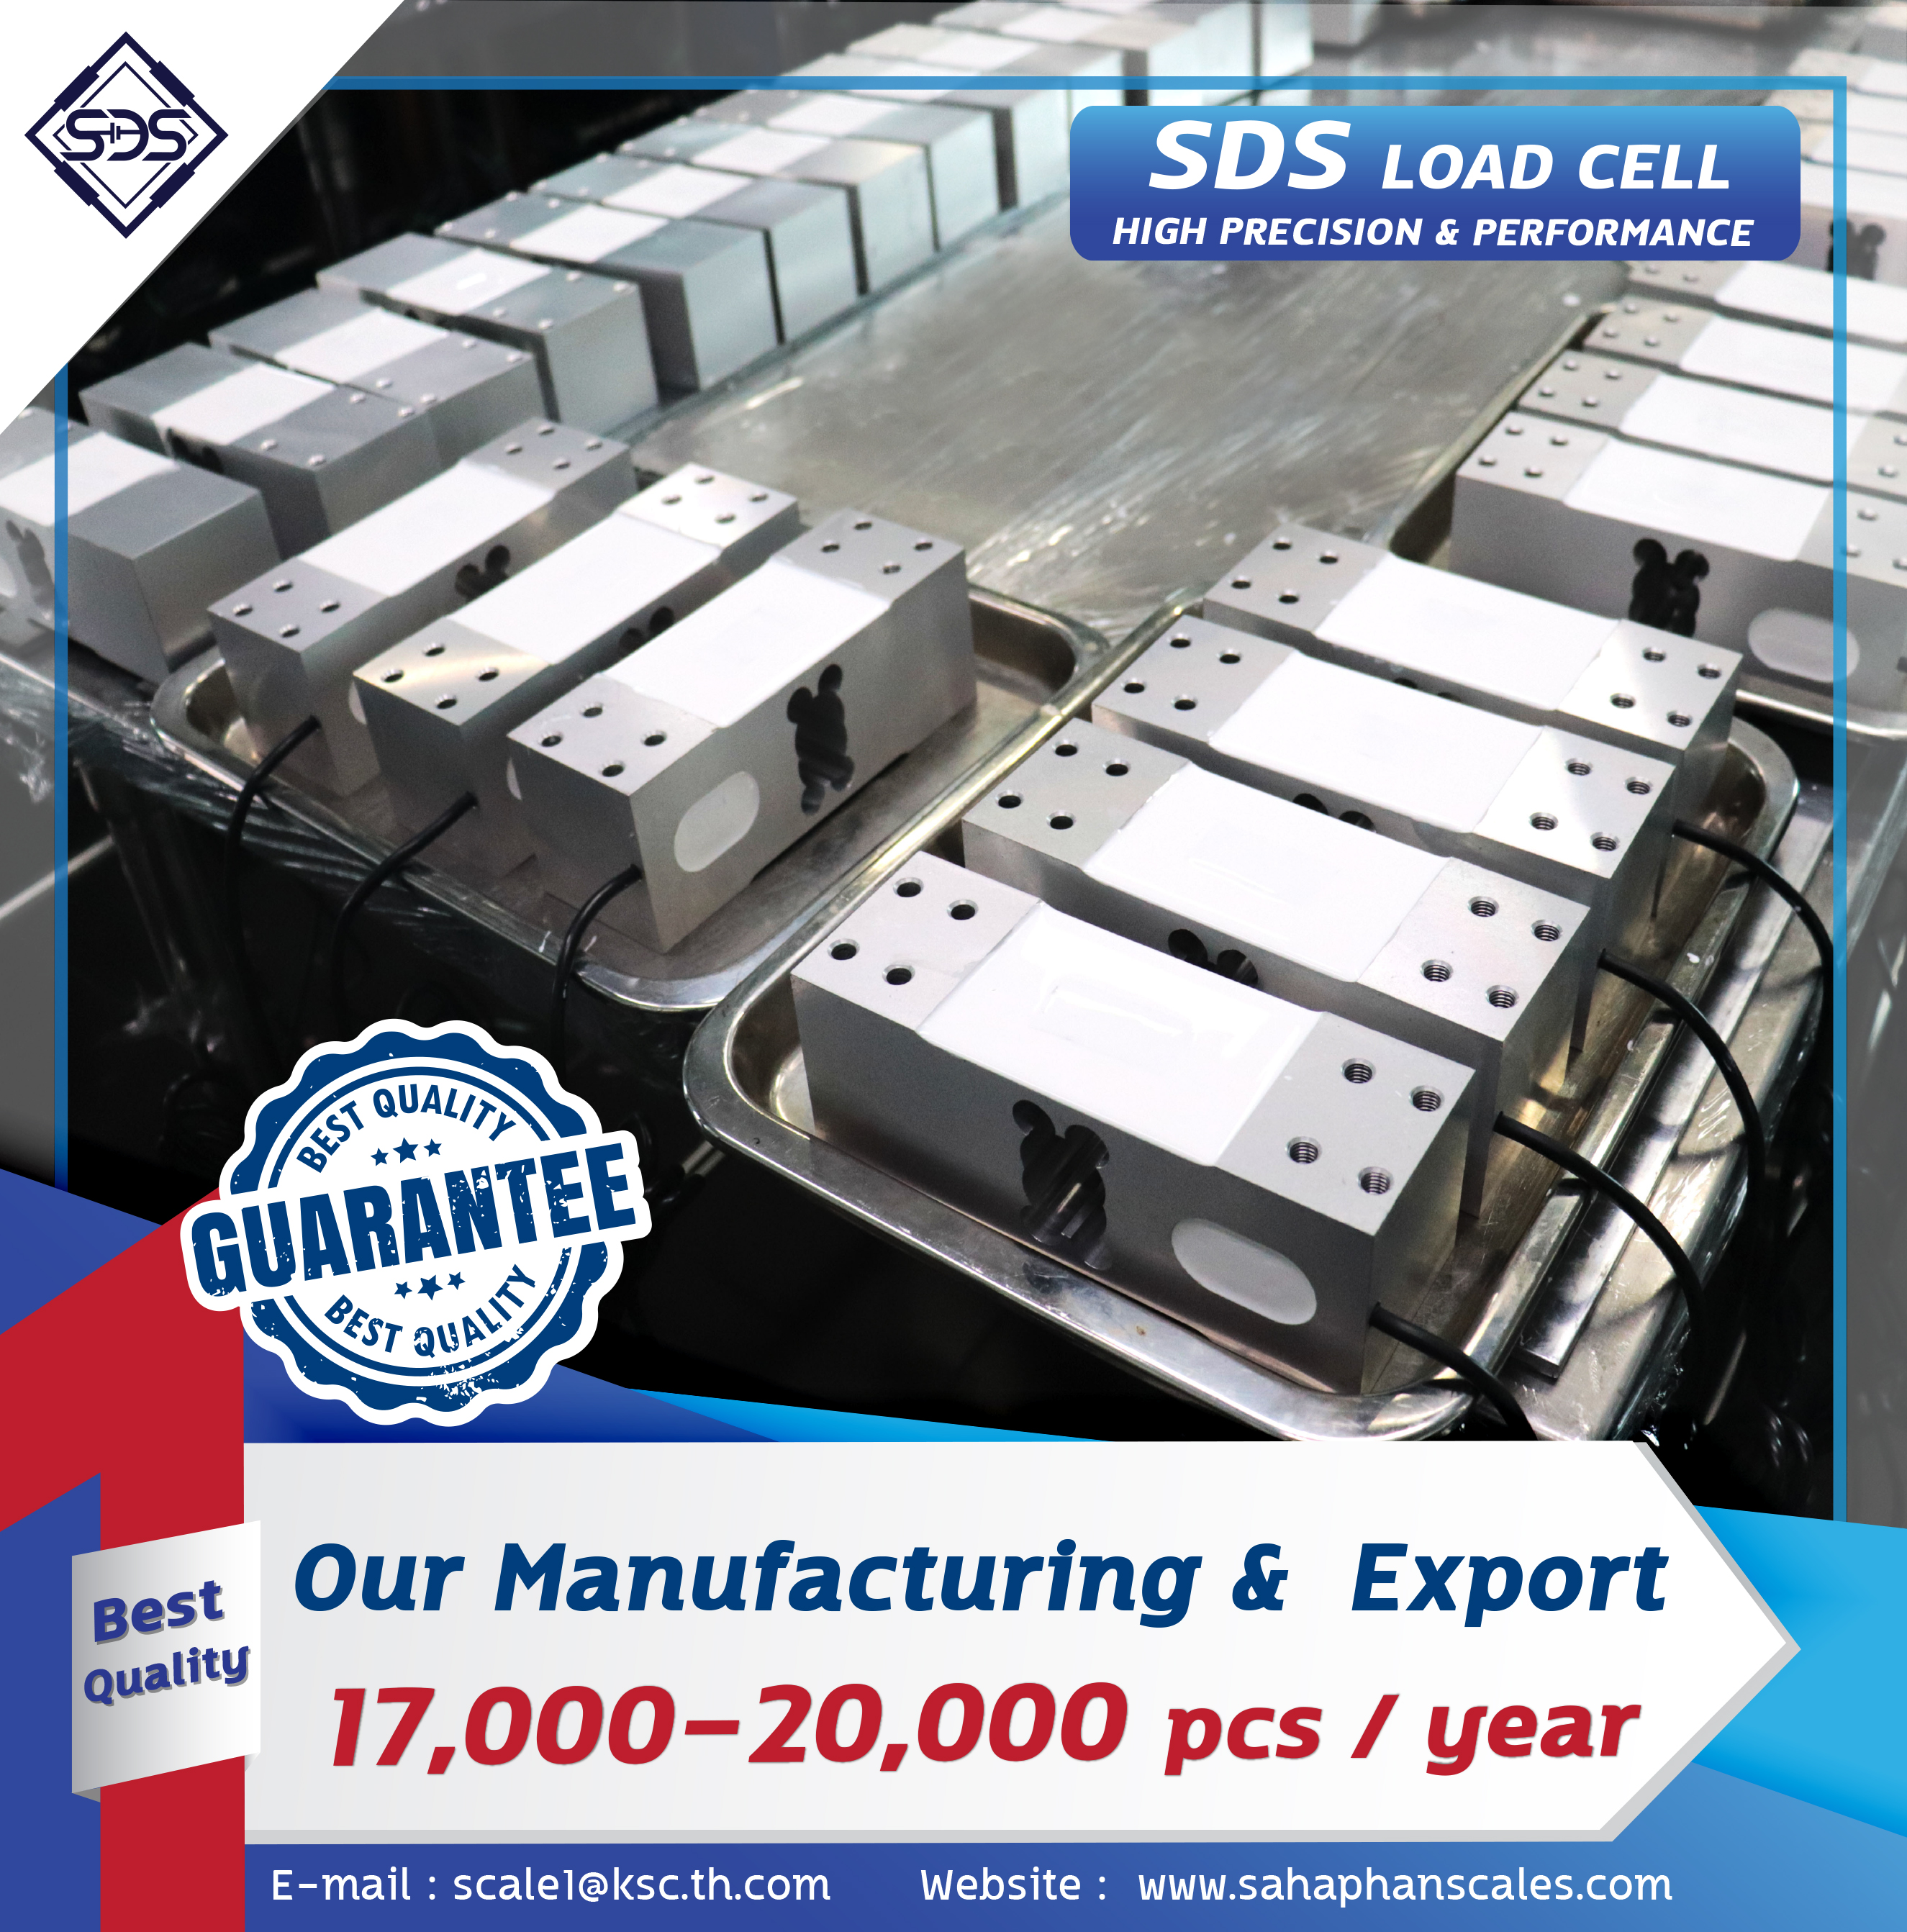 SDS Load Cell Manufacturing